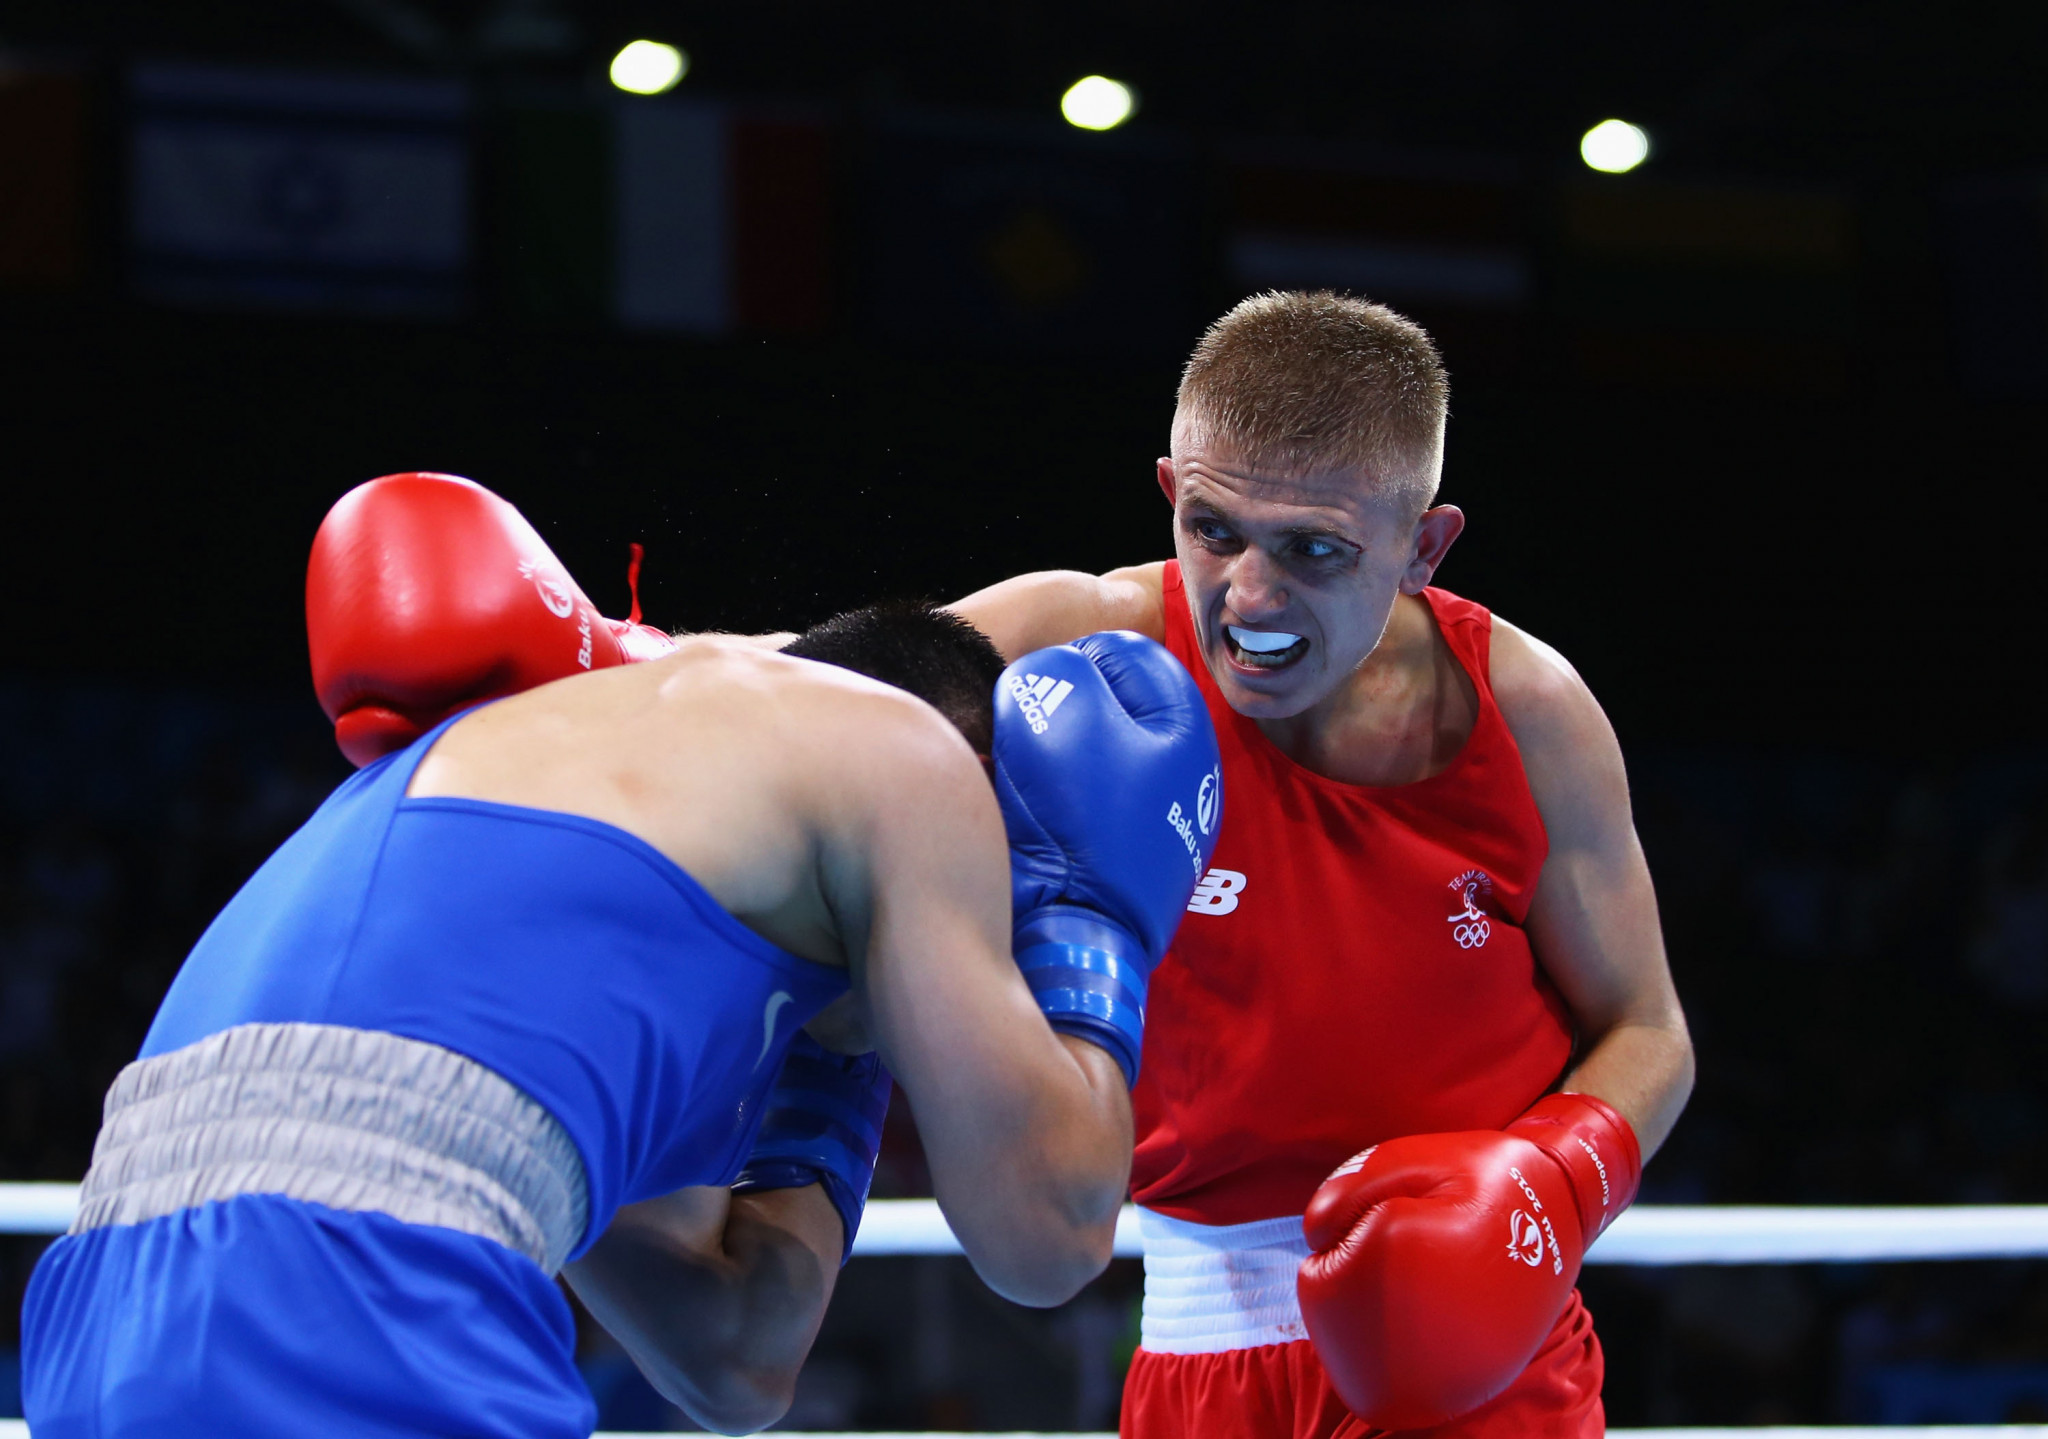 European featherweight champion Walker claims victory at AIBA World Championships